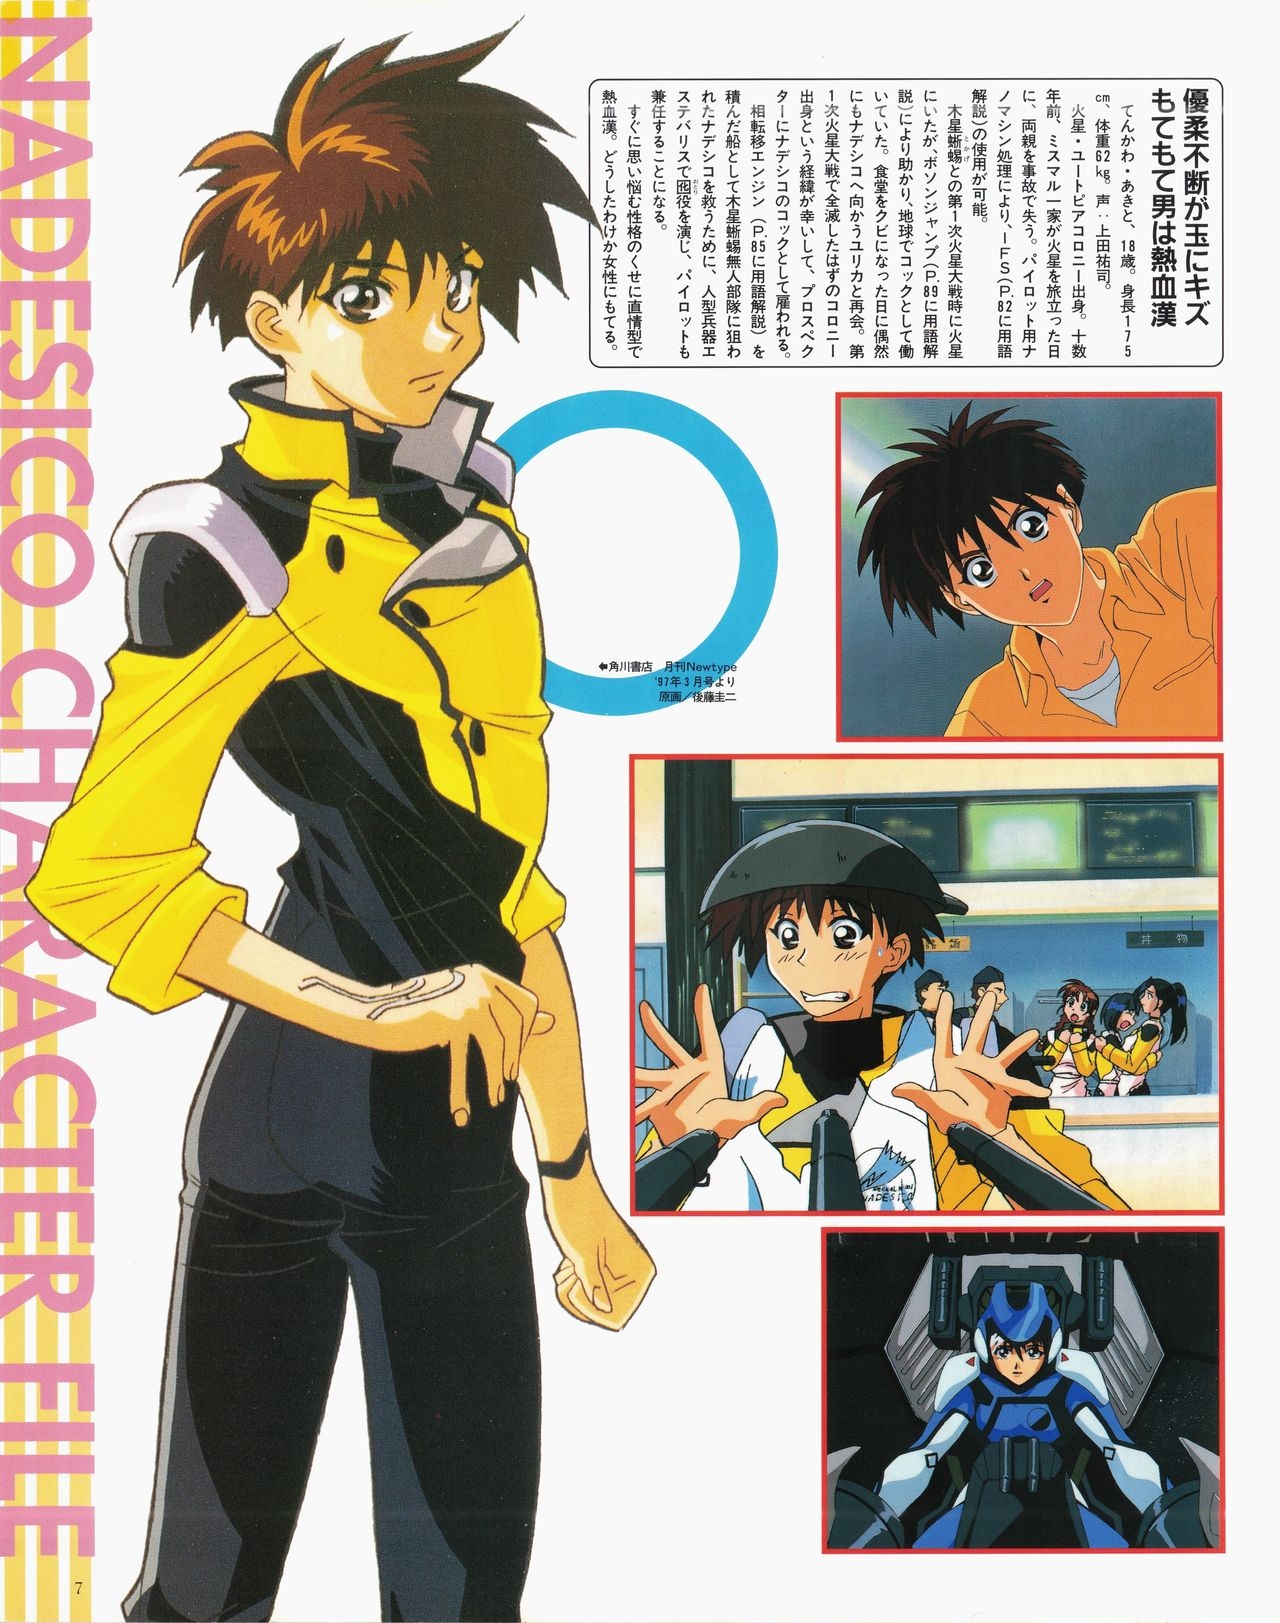 Newtype 100% Collection - Martian Successor Nadesico Perfects 9